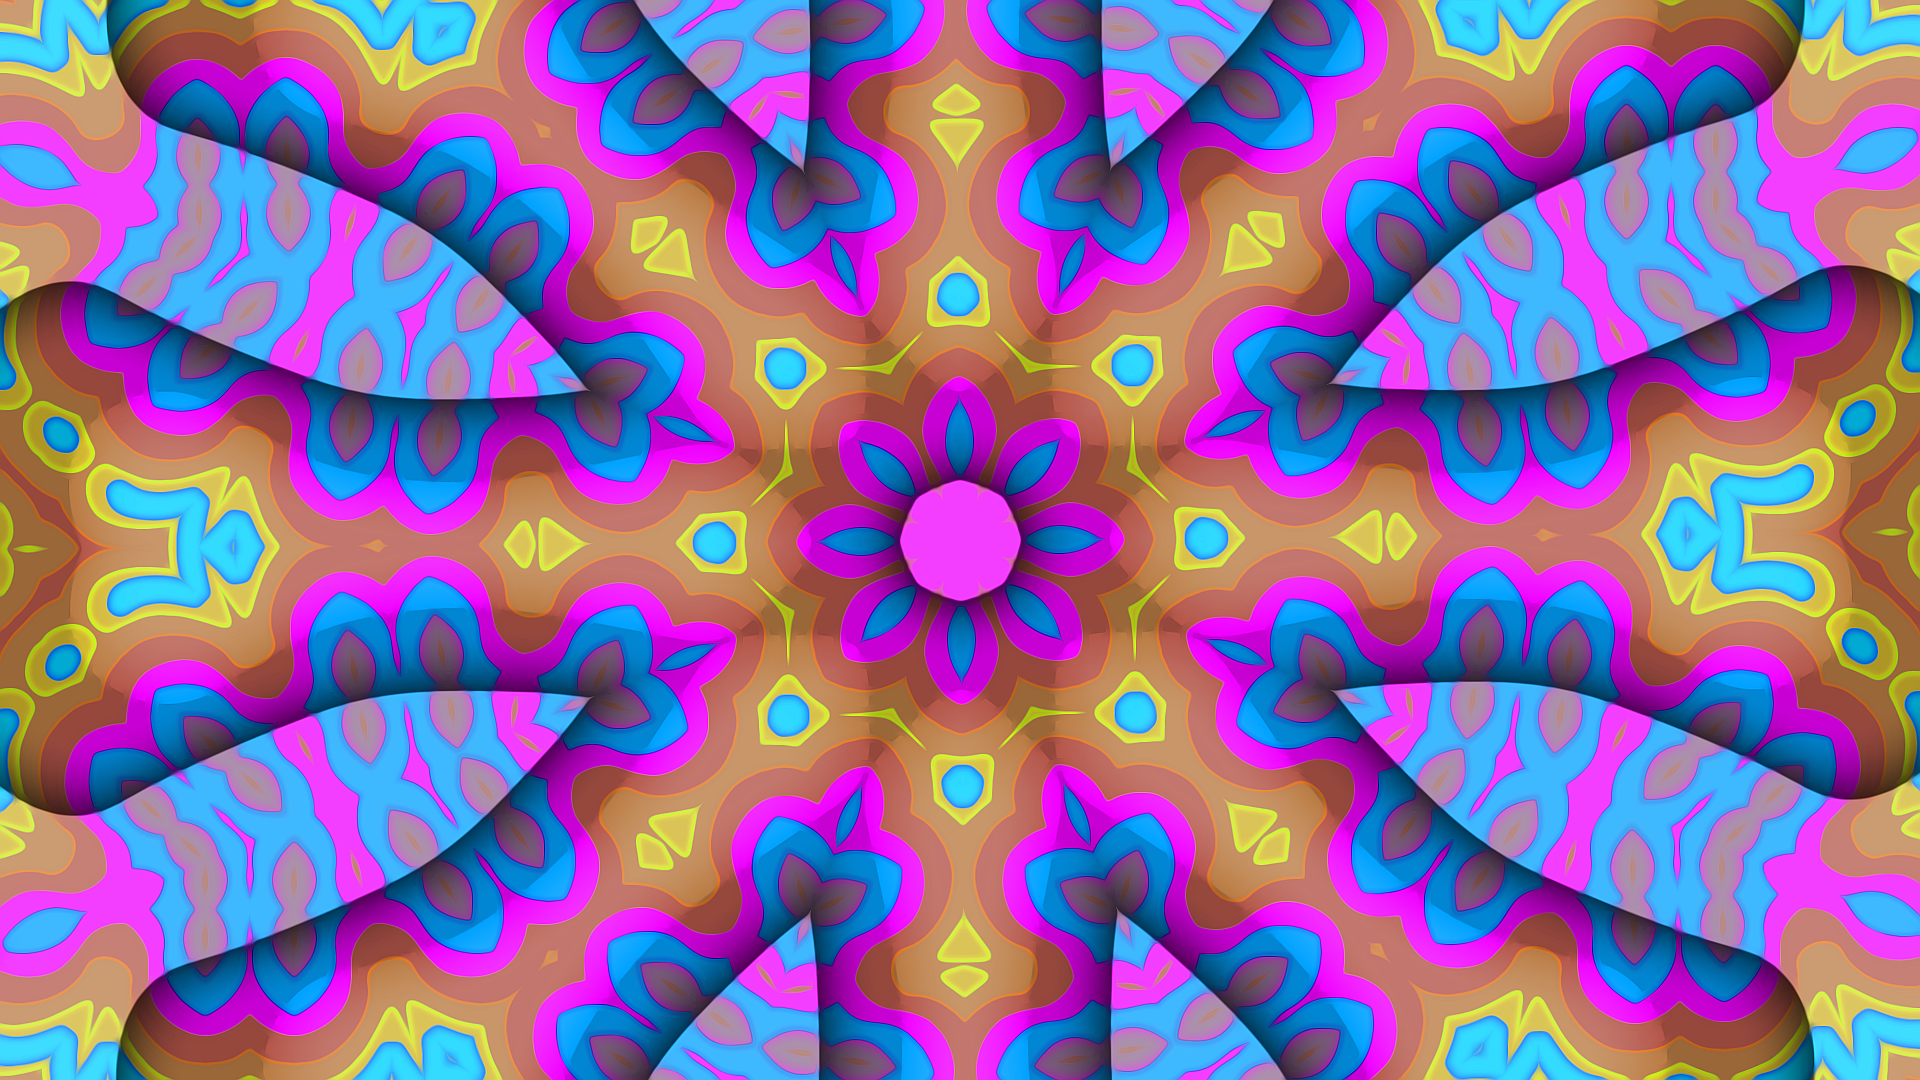 Blue and Pink 3D Kaleidoscope by lonewolf6738